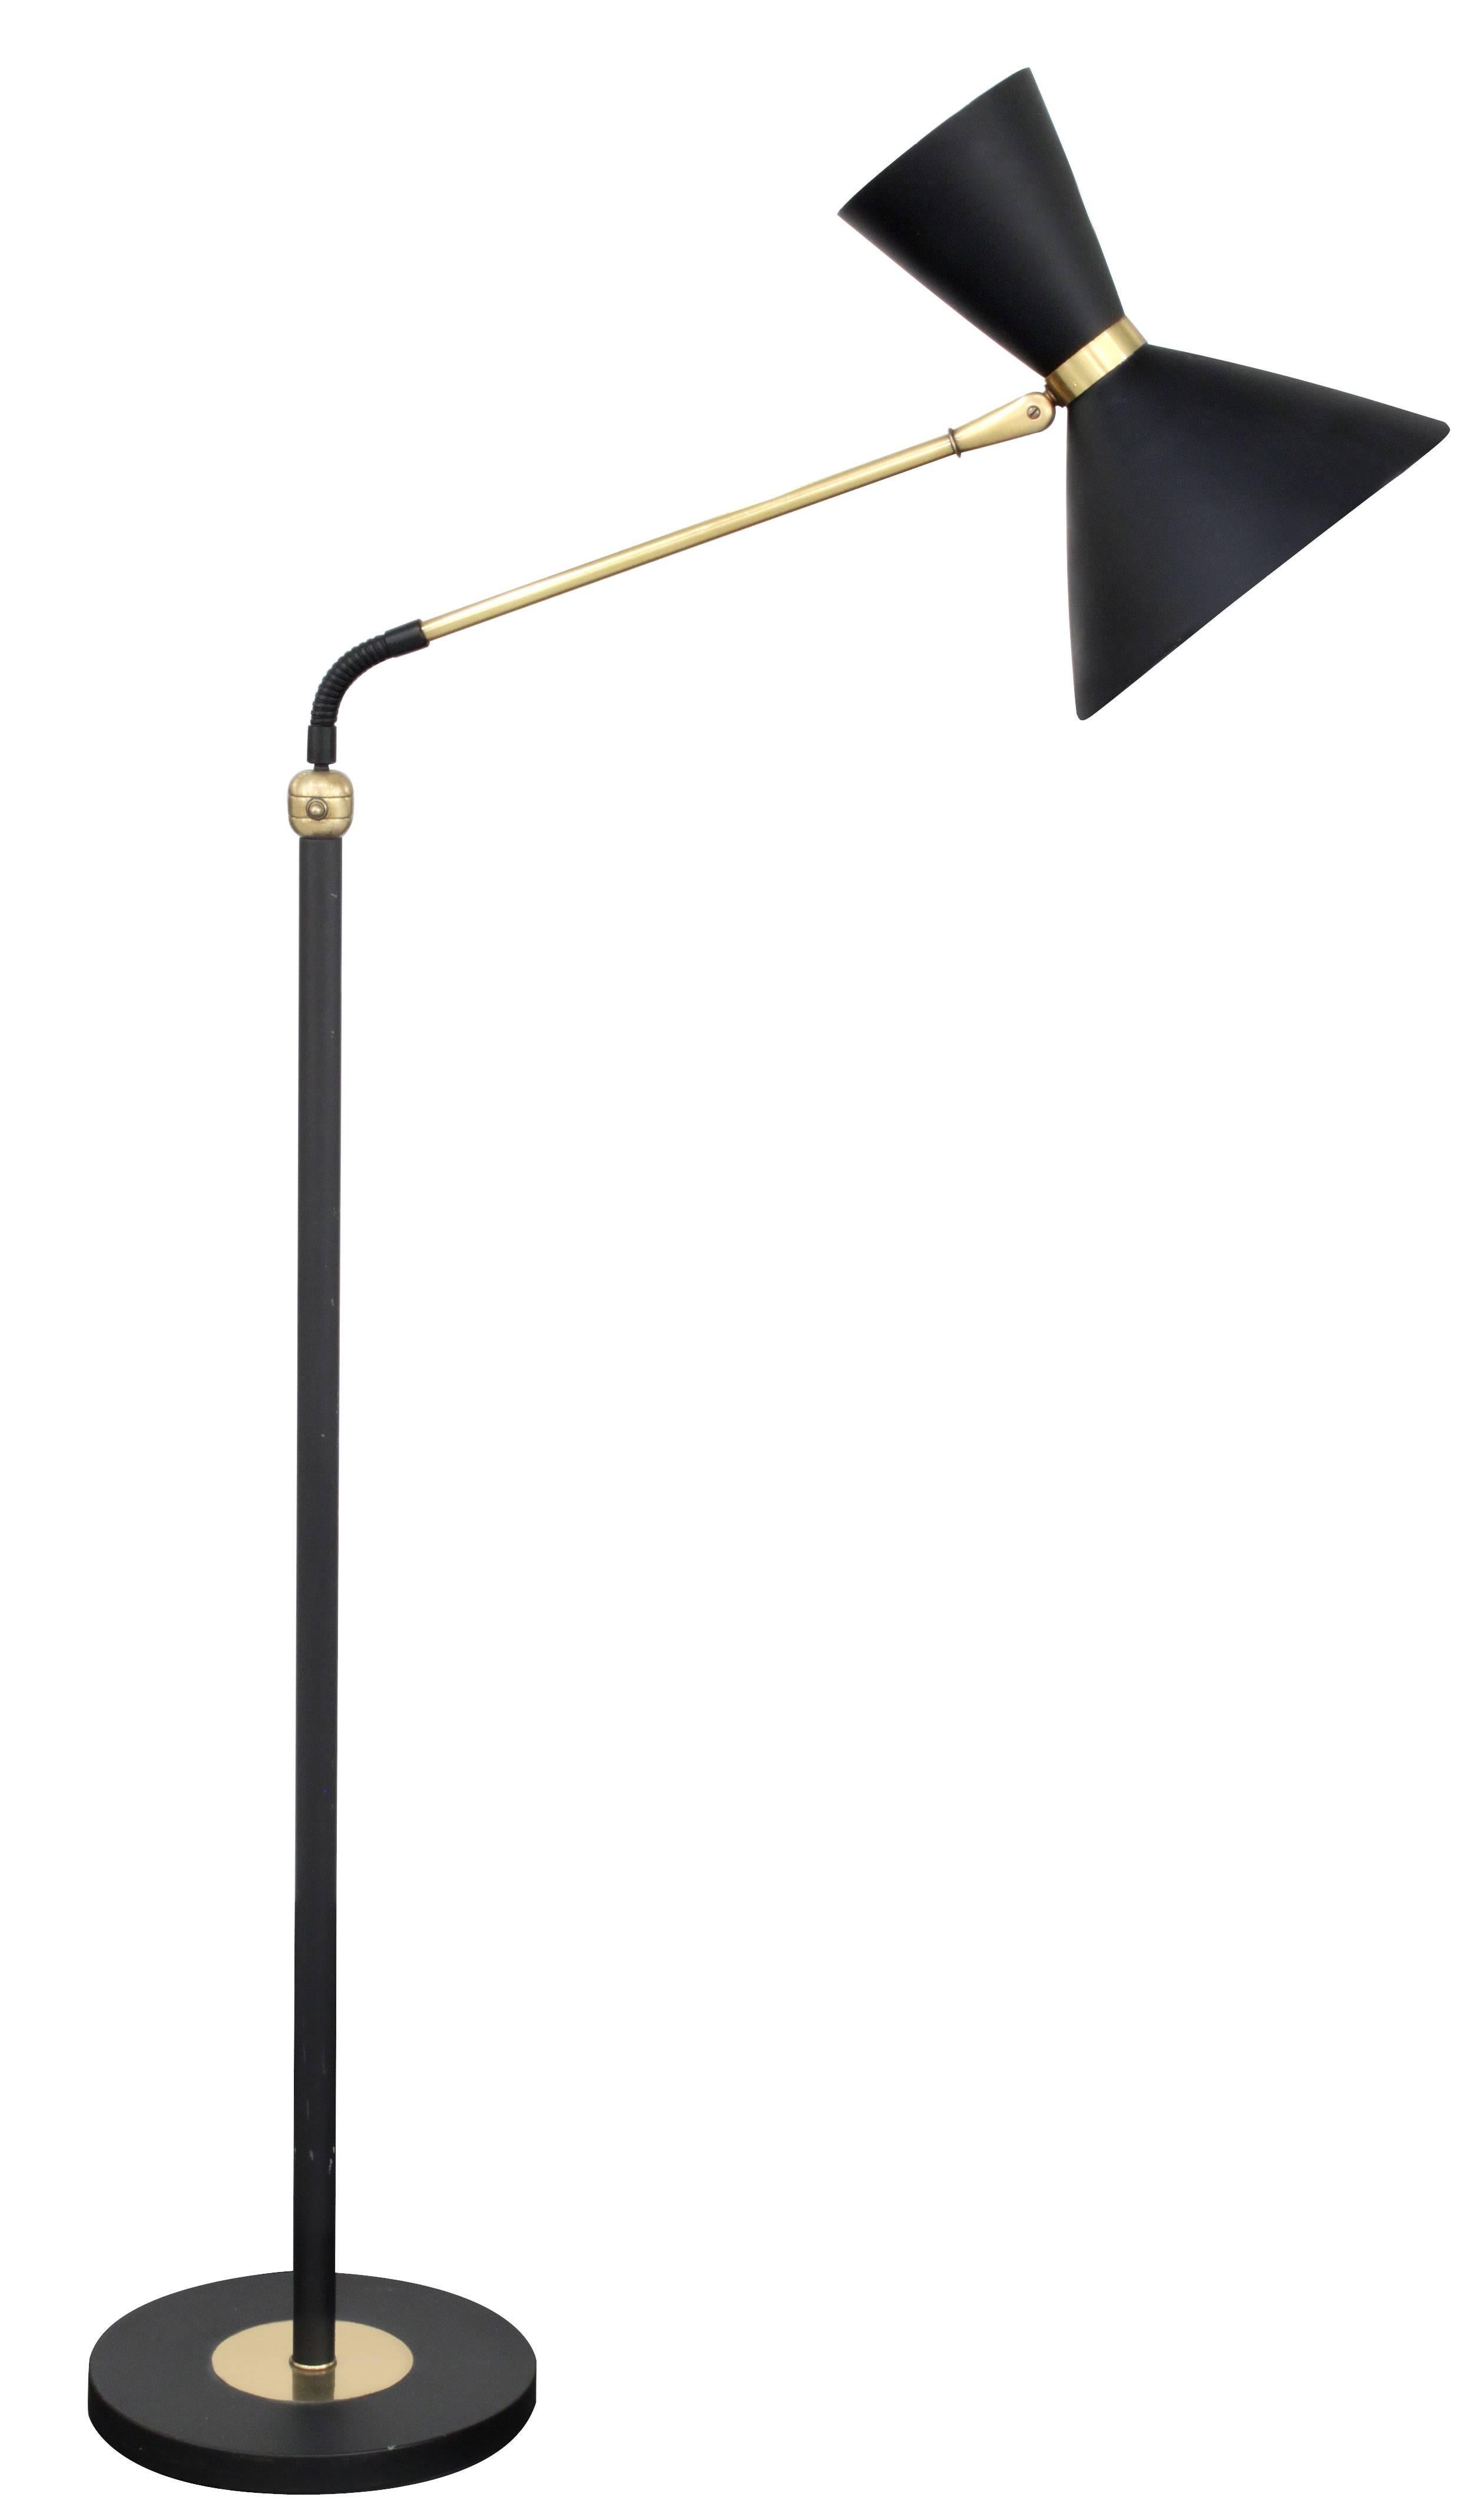 Floor lamp in brass with black shade (up and down lighting) attributed to Stilnovo, Italian, 1950s. Lamp is adjustable, completely upright it is 65 inches tall, angled all the way down it is 47 1/2 inches tall.
 